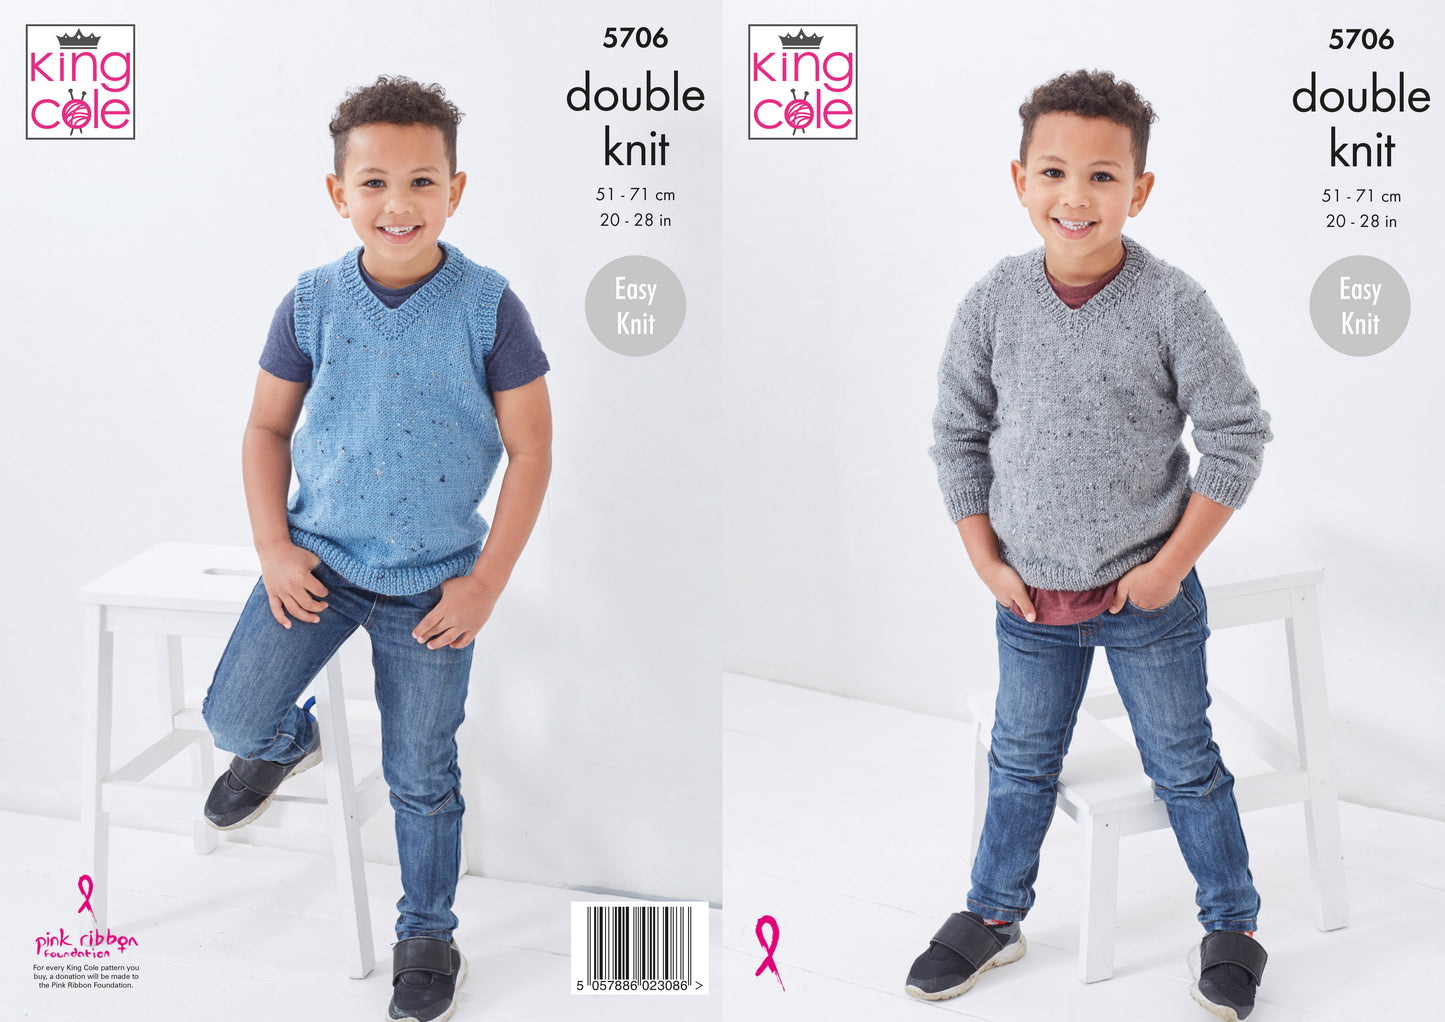 King Cole Big Value Tweed DK Pattern - 5706 Children's Sweater and Slipover